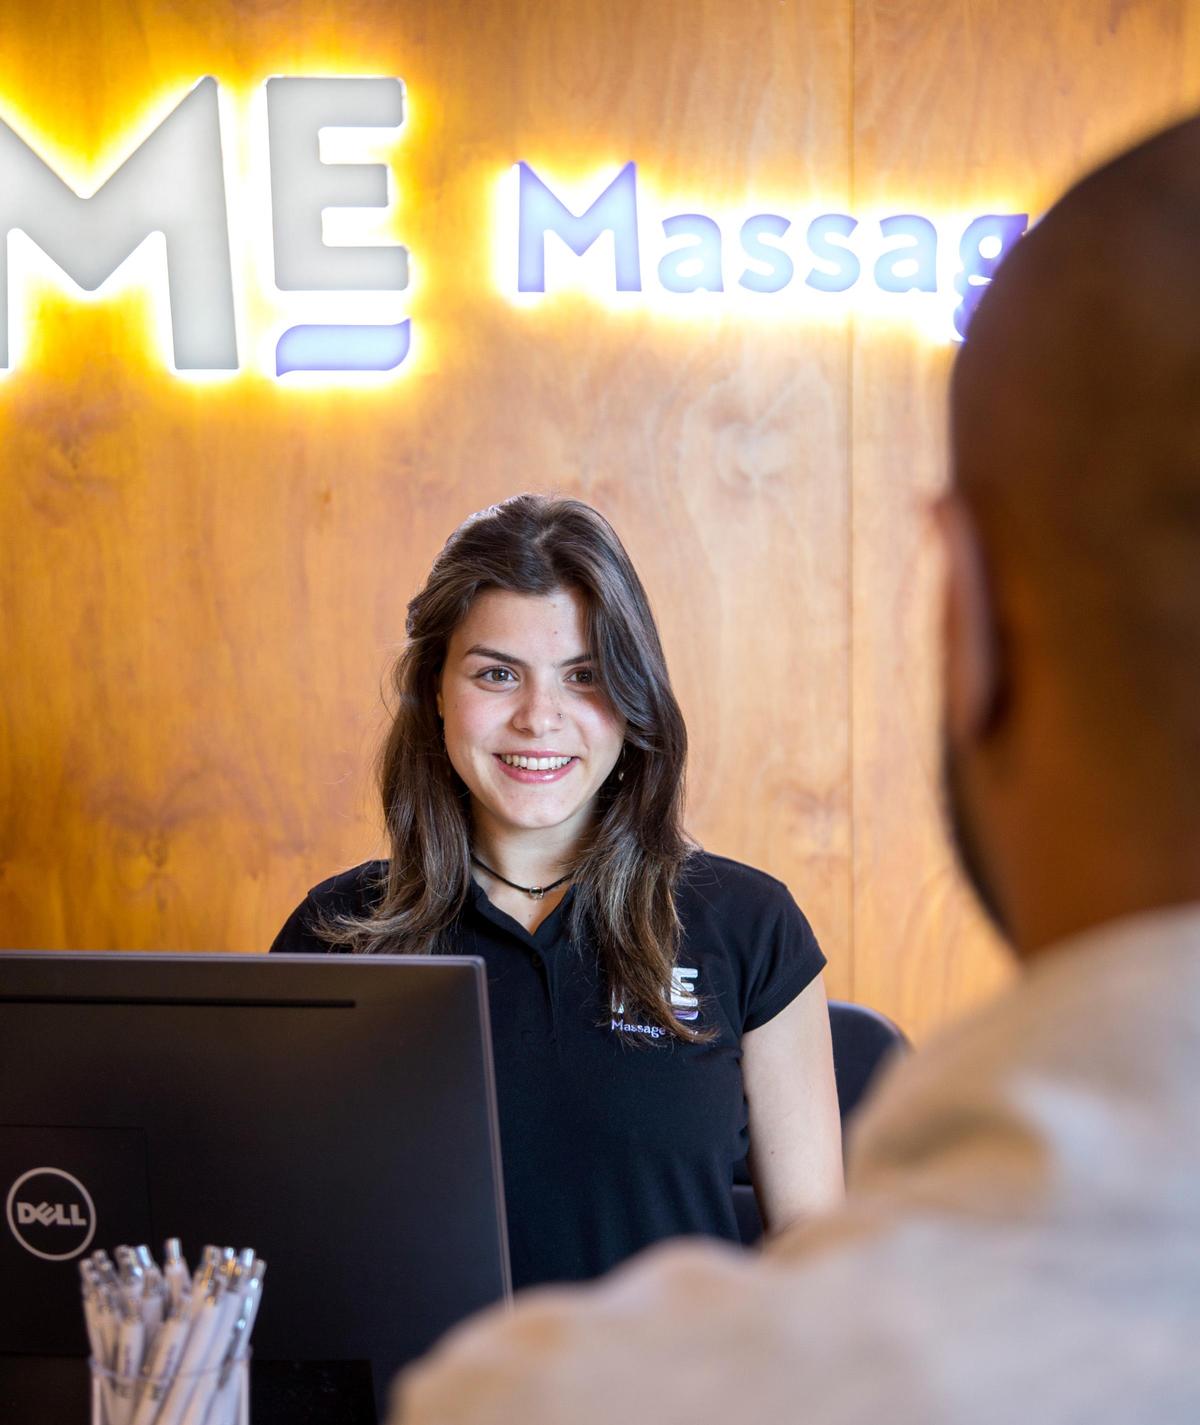 The partnership creates opportunities for Cortiva students to interview for positions in Massage Envy's more than 1,150 locations in 49 states / 